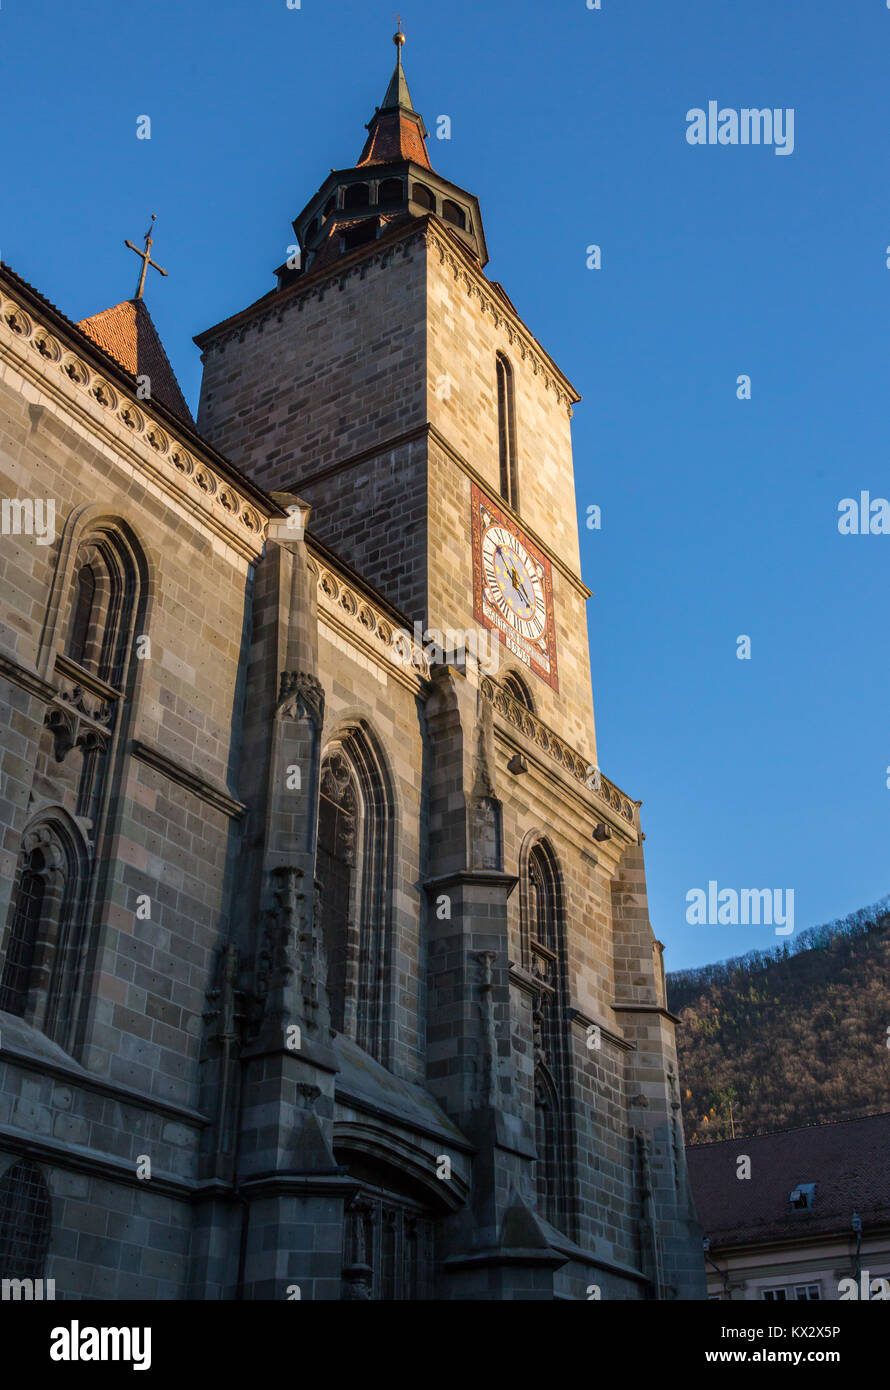 the central square of the old town. Brasov. Transylvania. View from above. The buildings, the people on the square like little ants. An interesting effect. Stock Photo